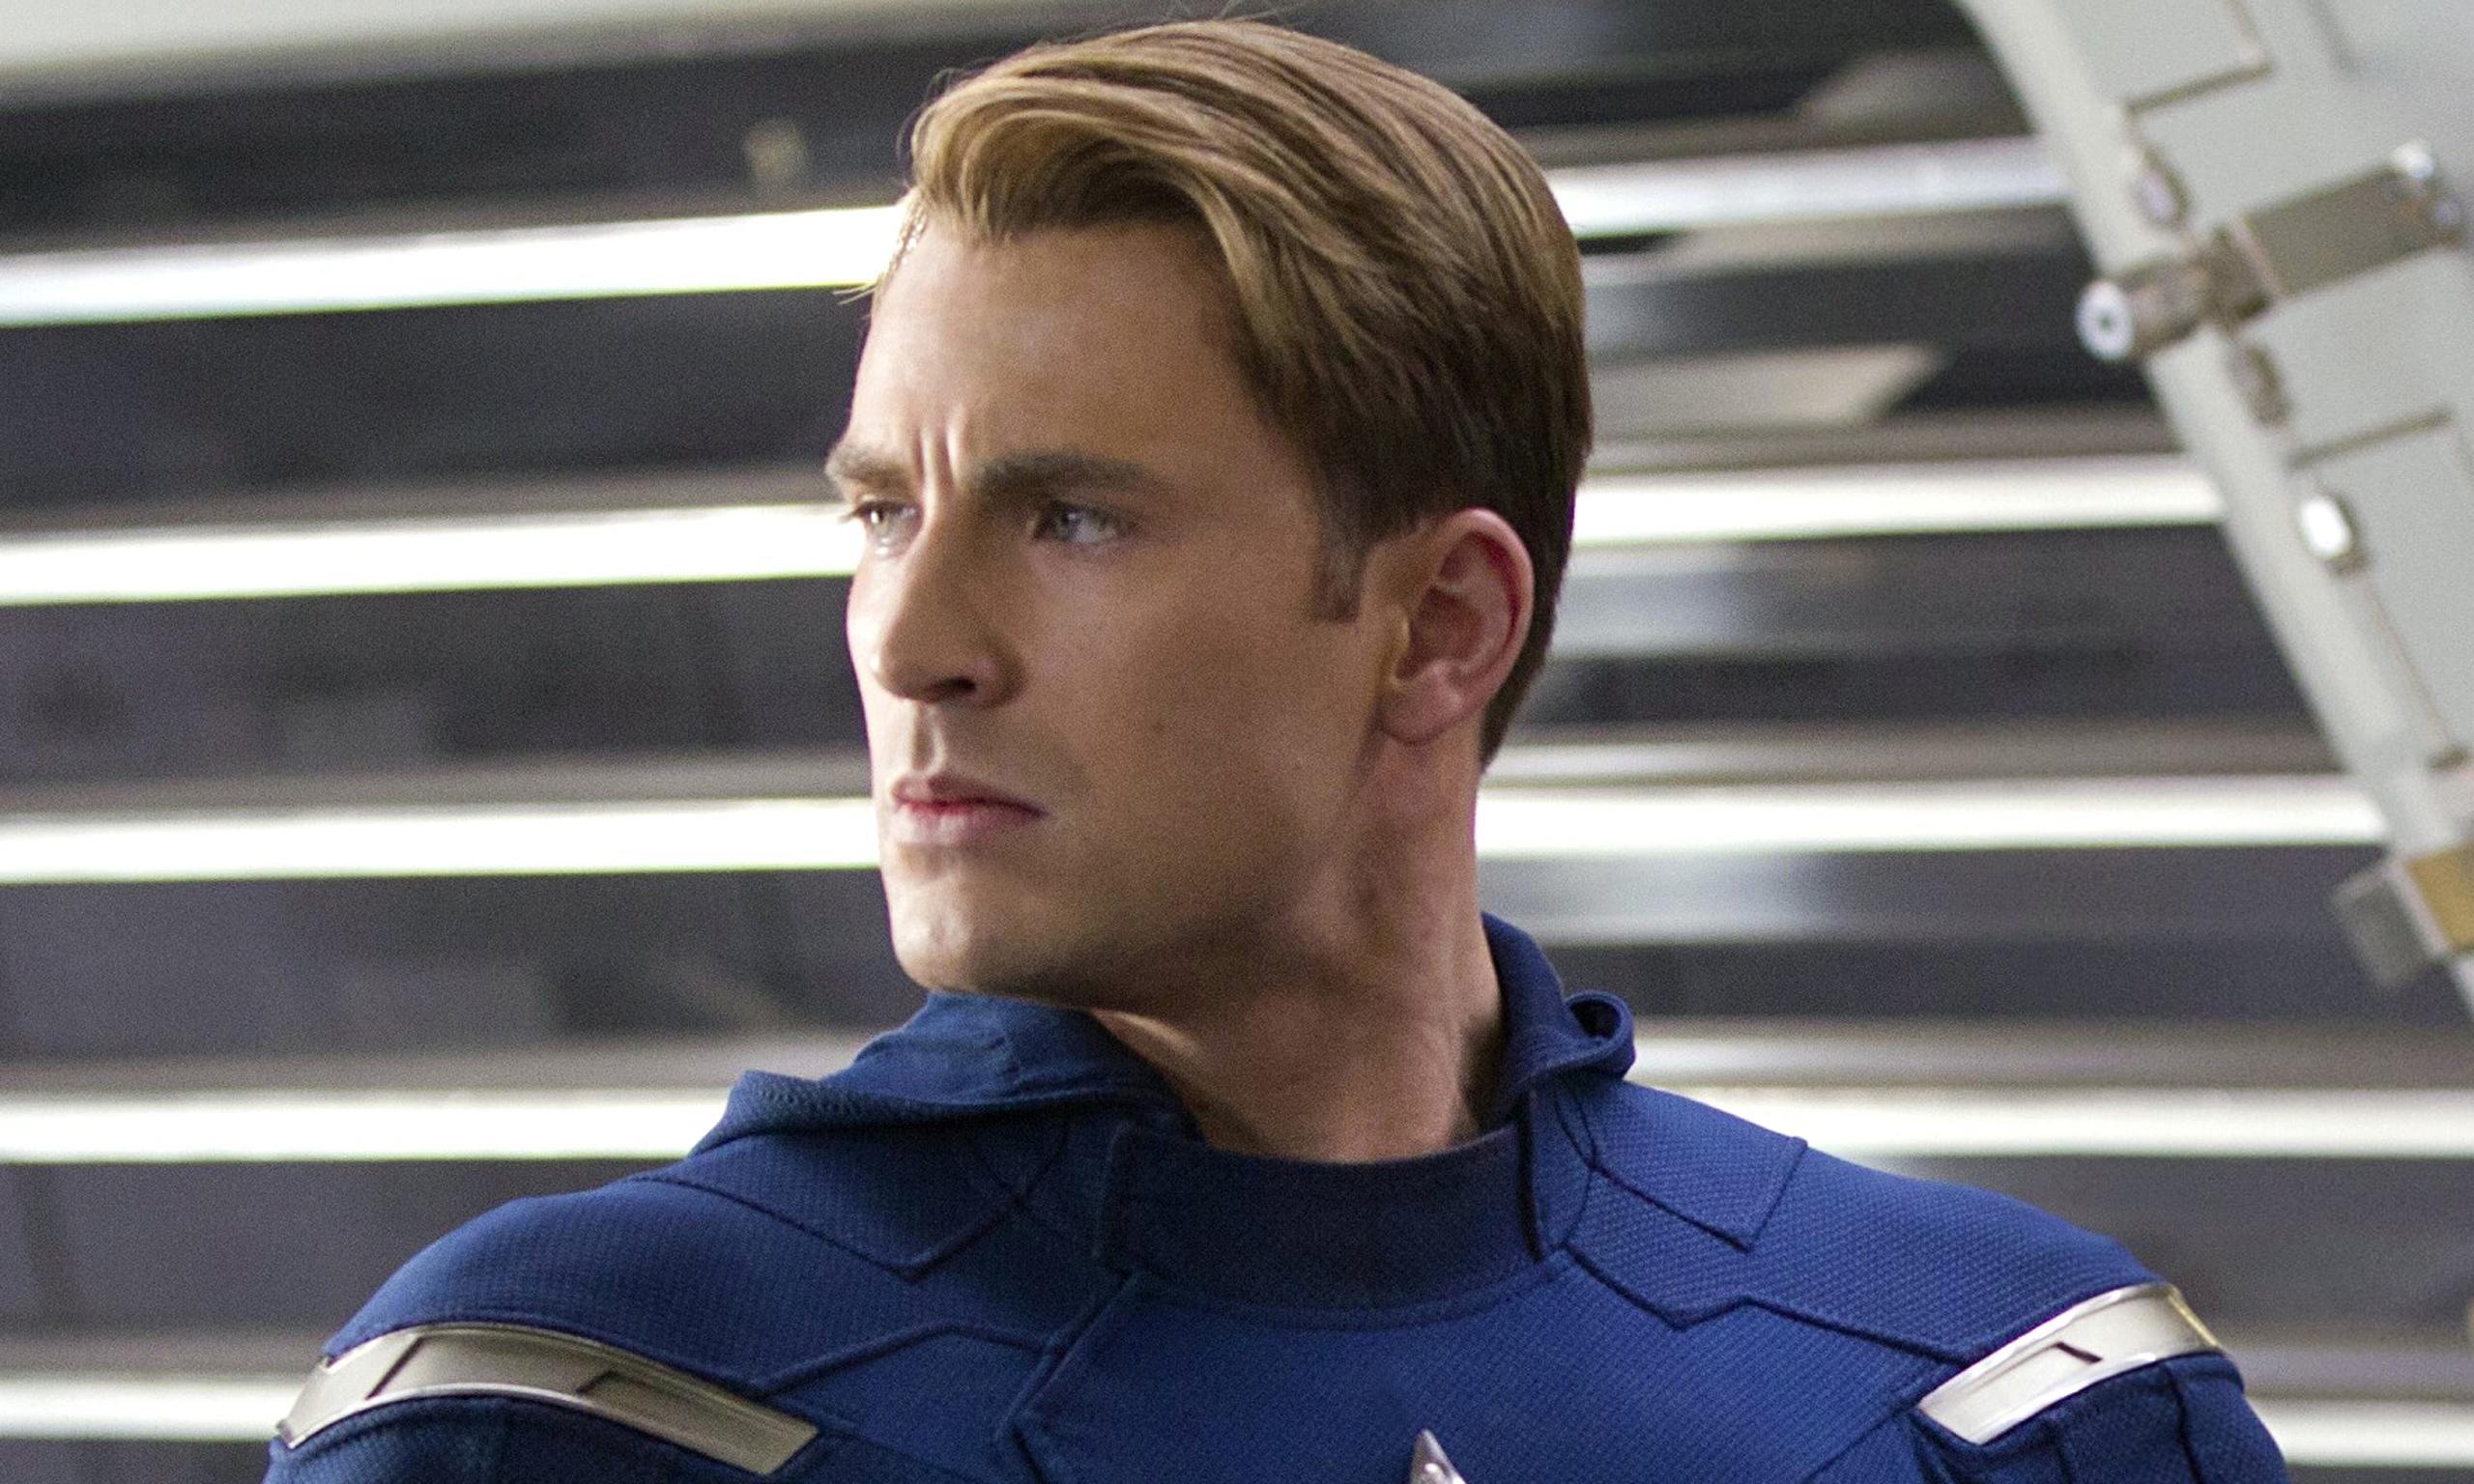 actor who plays new captain america